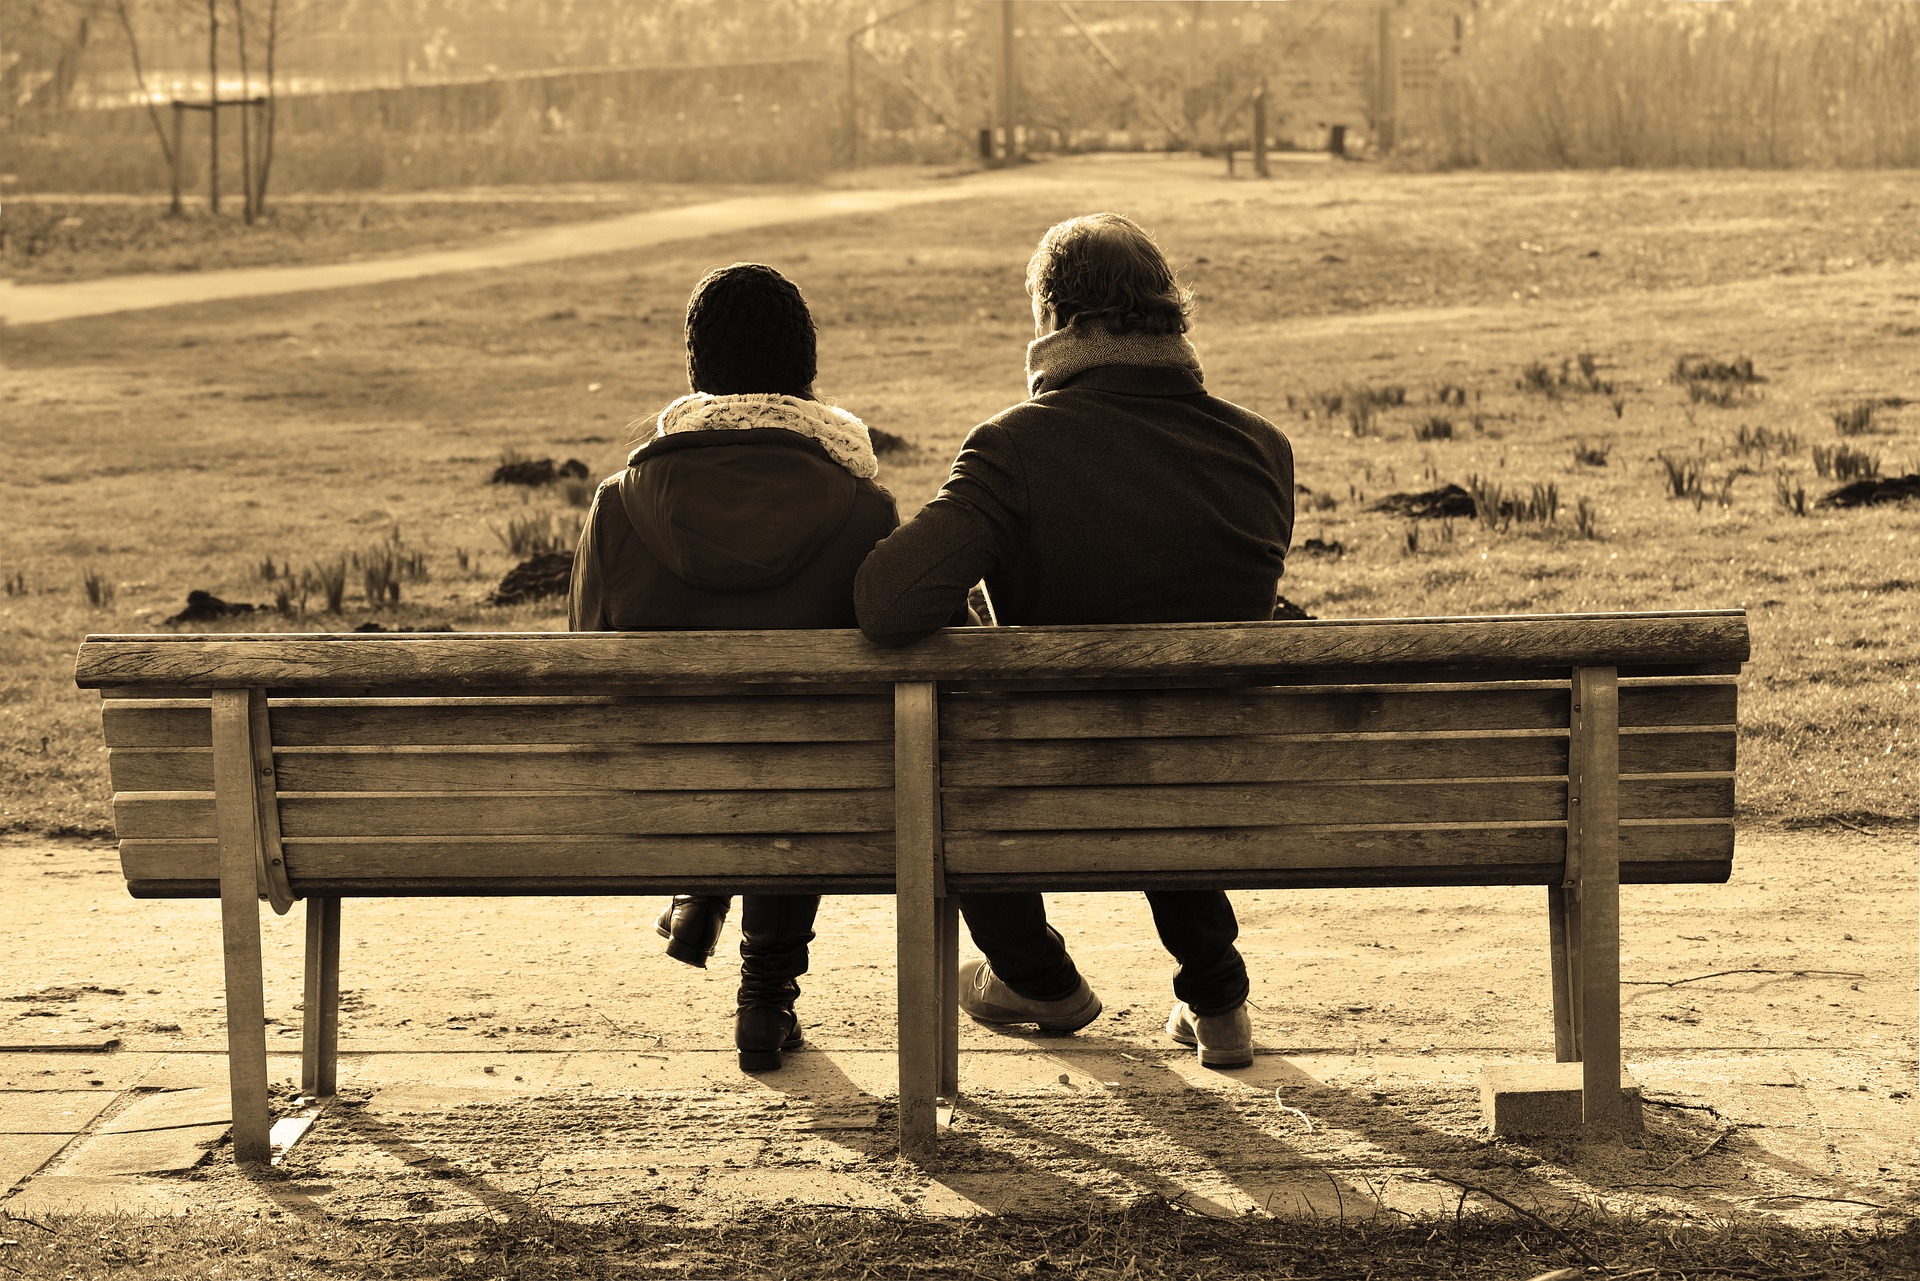 Couple conversing on a wooden bench